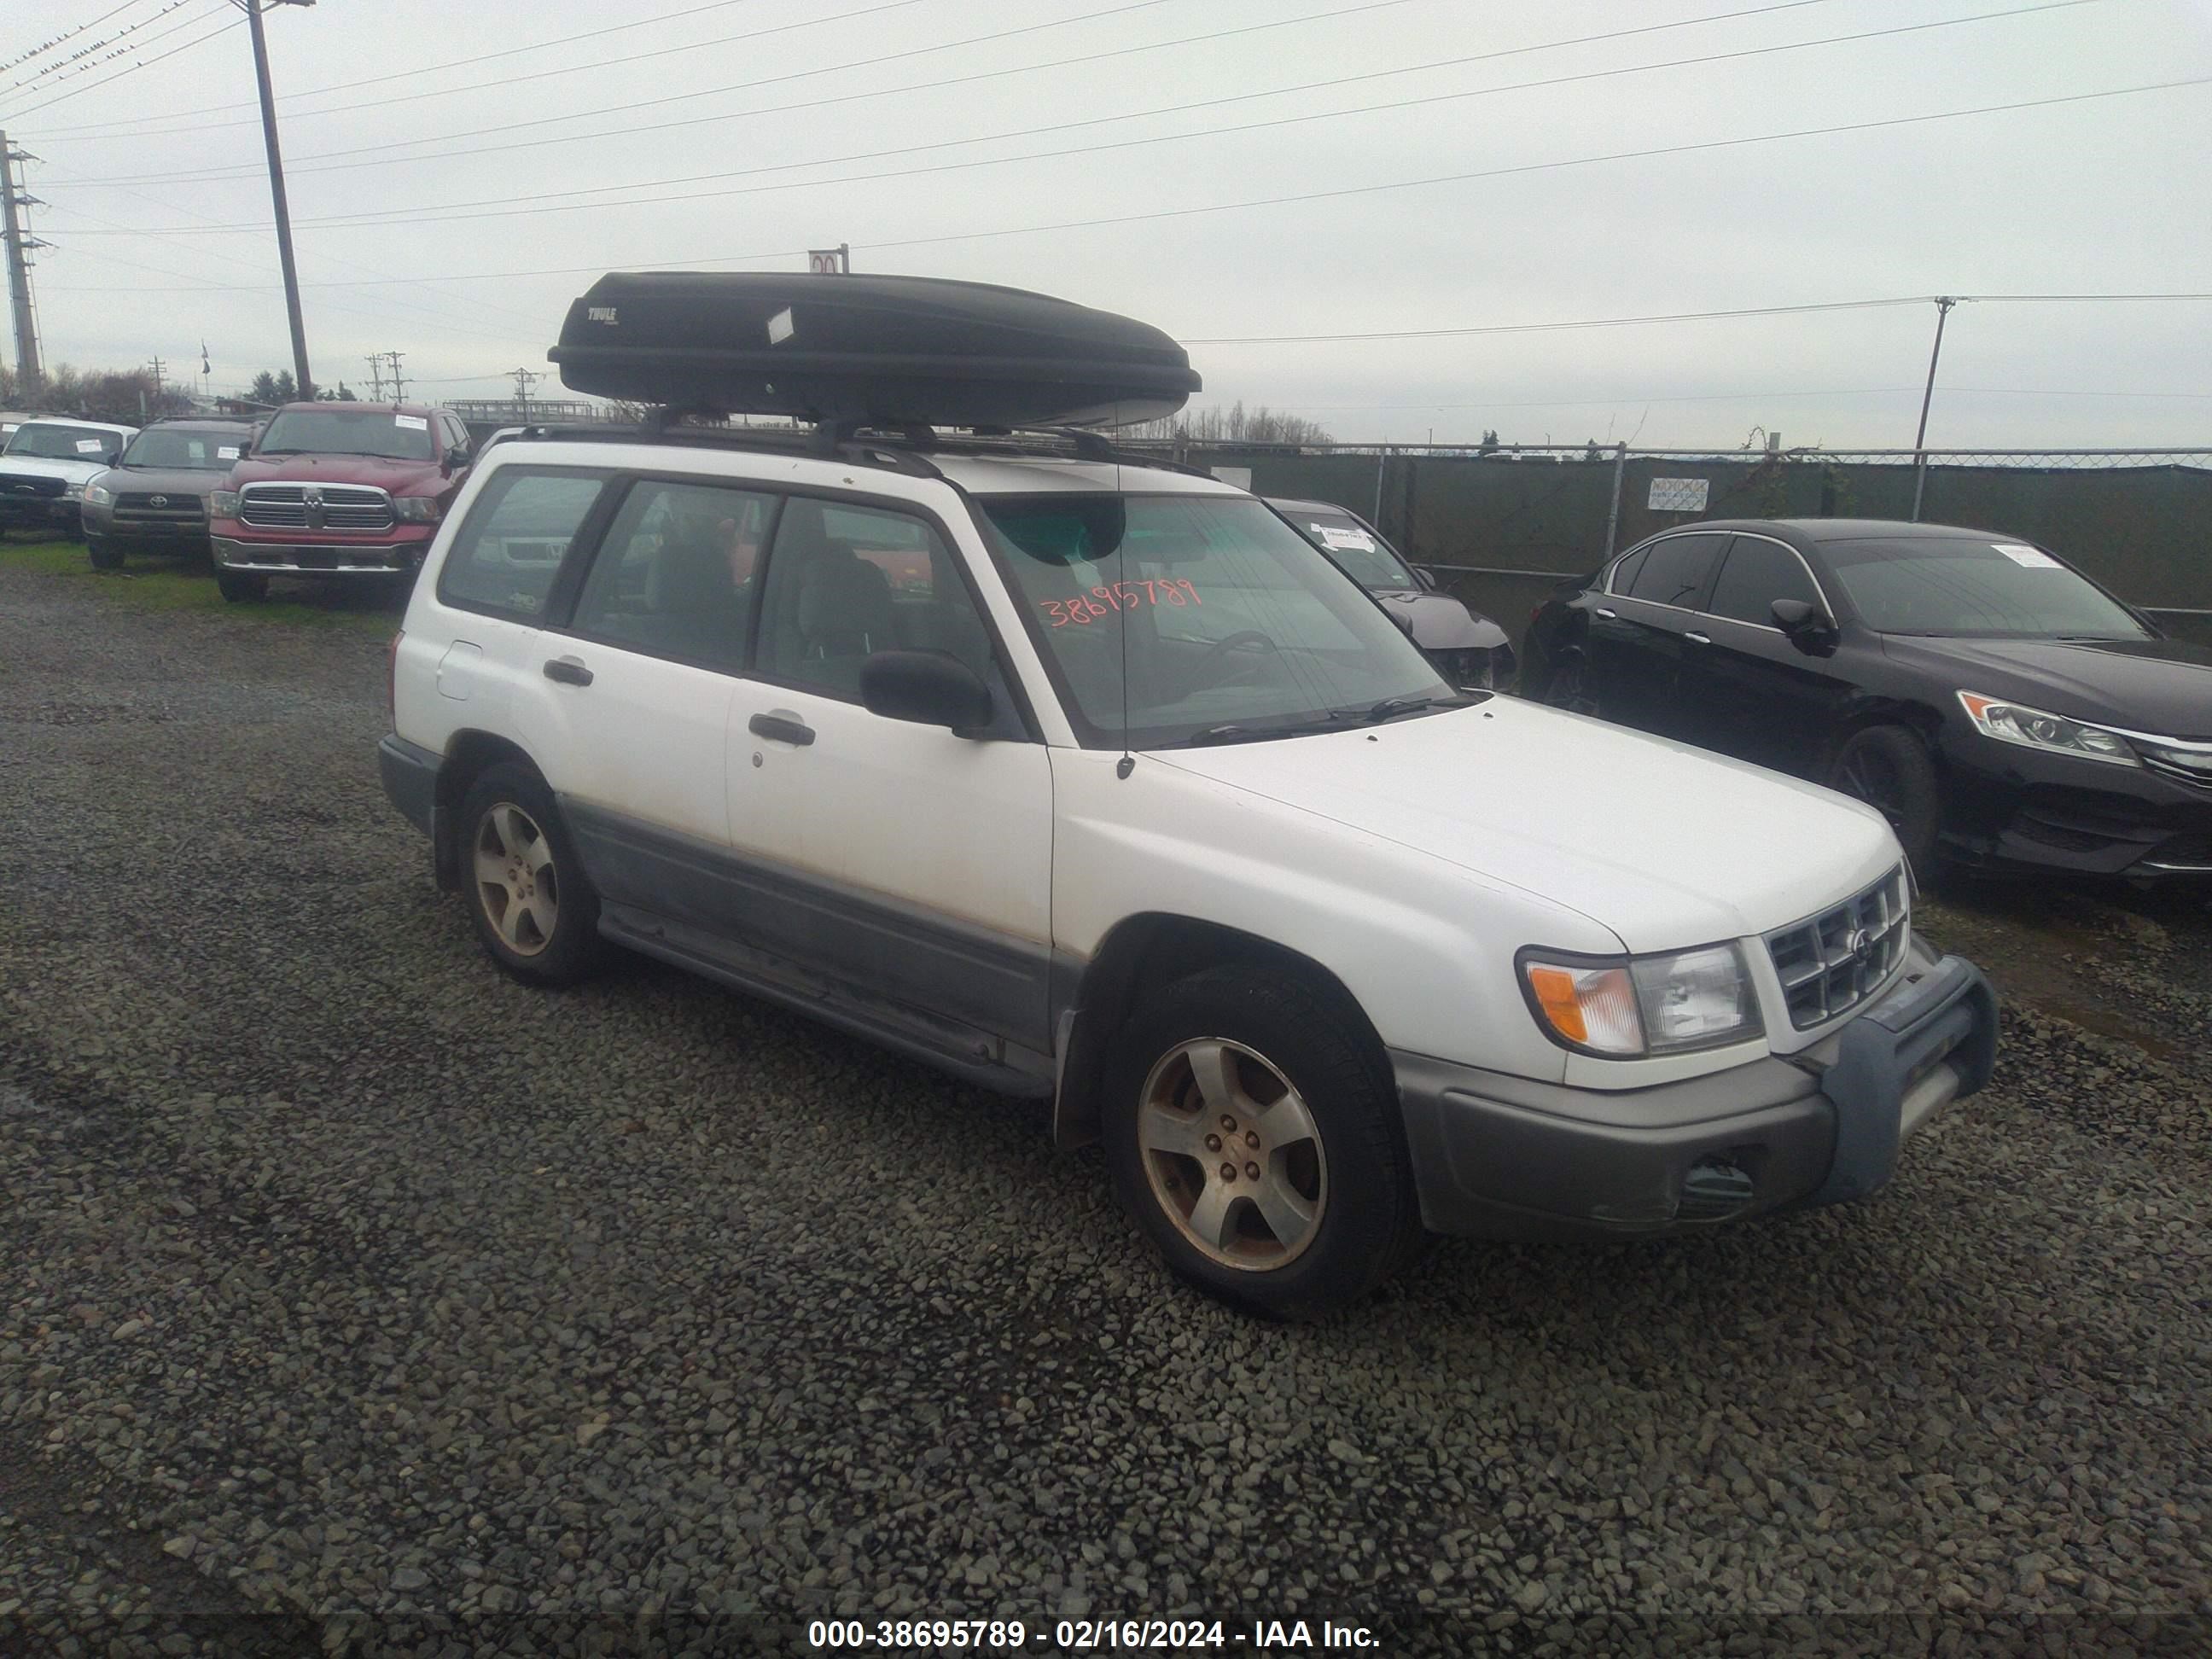 JF1SF6556WH753773  - SUBARU FORESTER  1998 IMG - 0